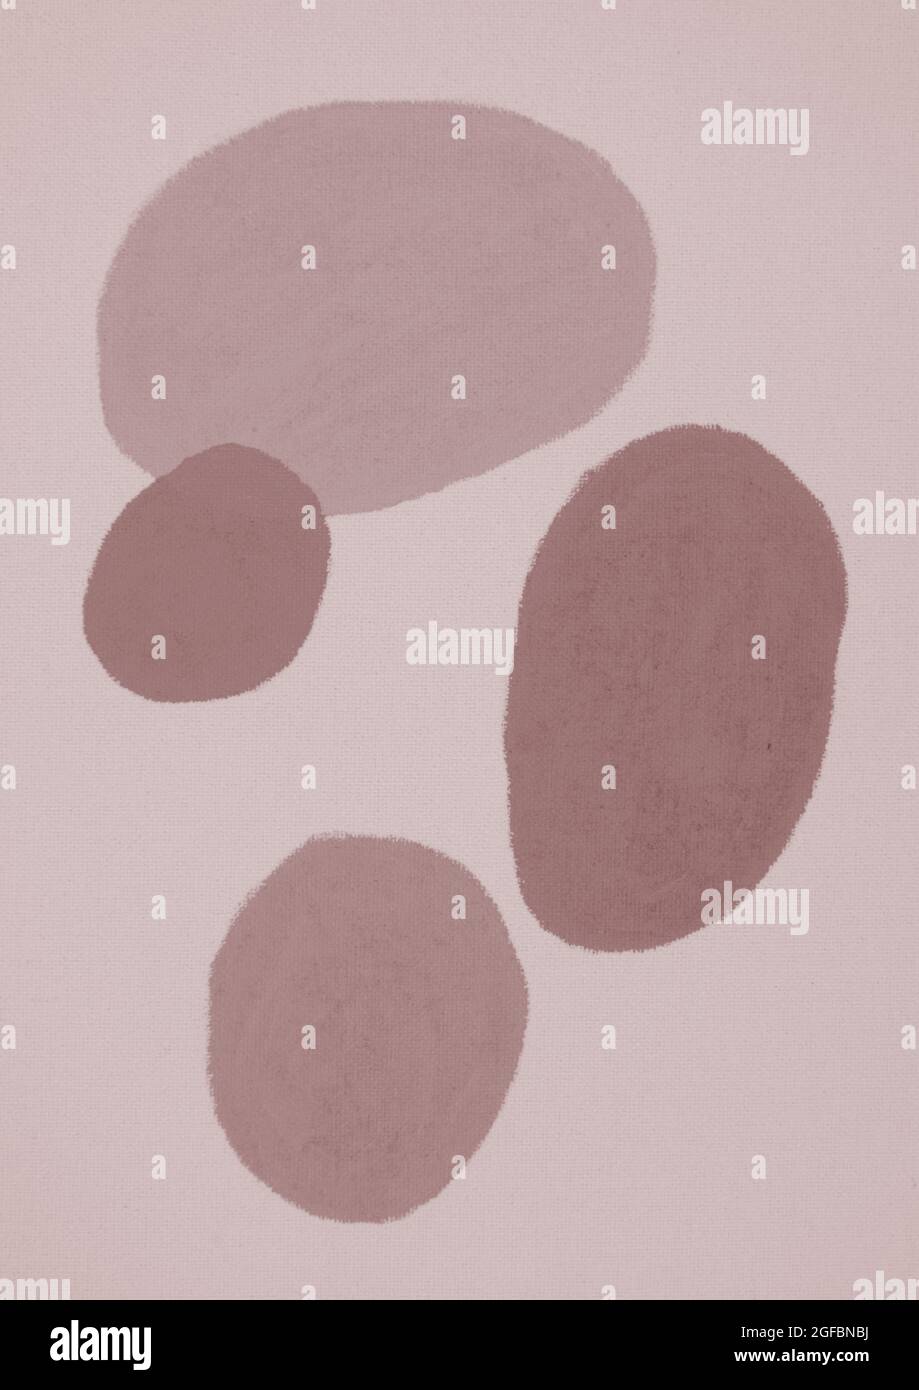 Handmade, earth tone, neutral brown, gray, mid-century geometric organic shapes style art texture background. Hand painted canvas. Stock Photo